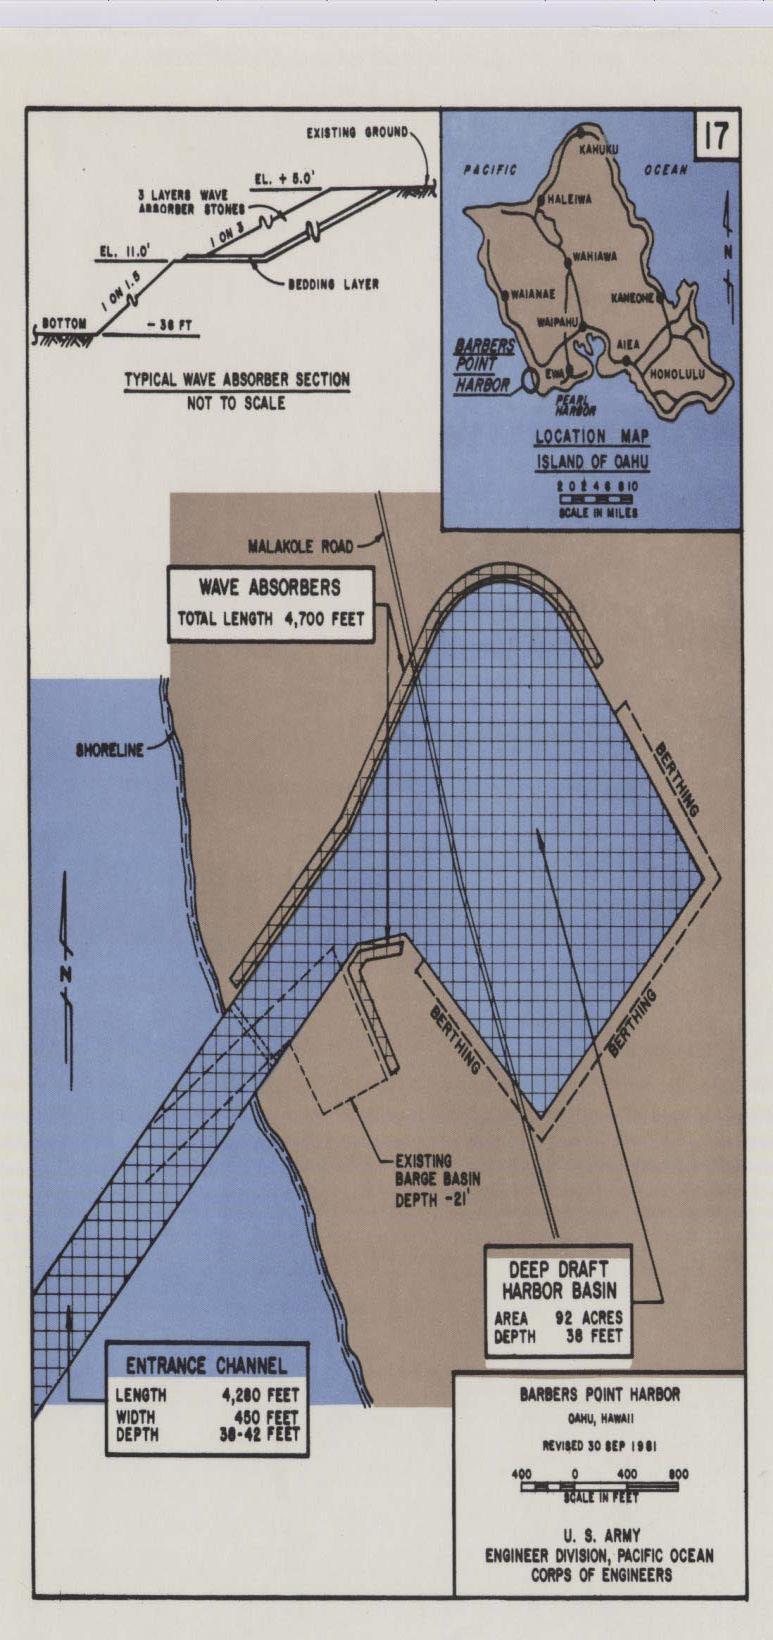 to 650 feet over the last 200 feet, and 38 feet deep) ; a 92-acre inshore basin (38 feet deep); and, 4,600 feet of wave absorber structures.